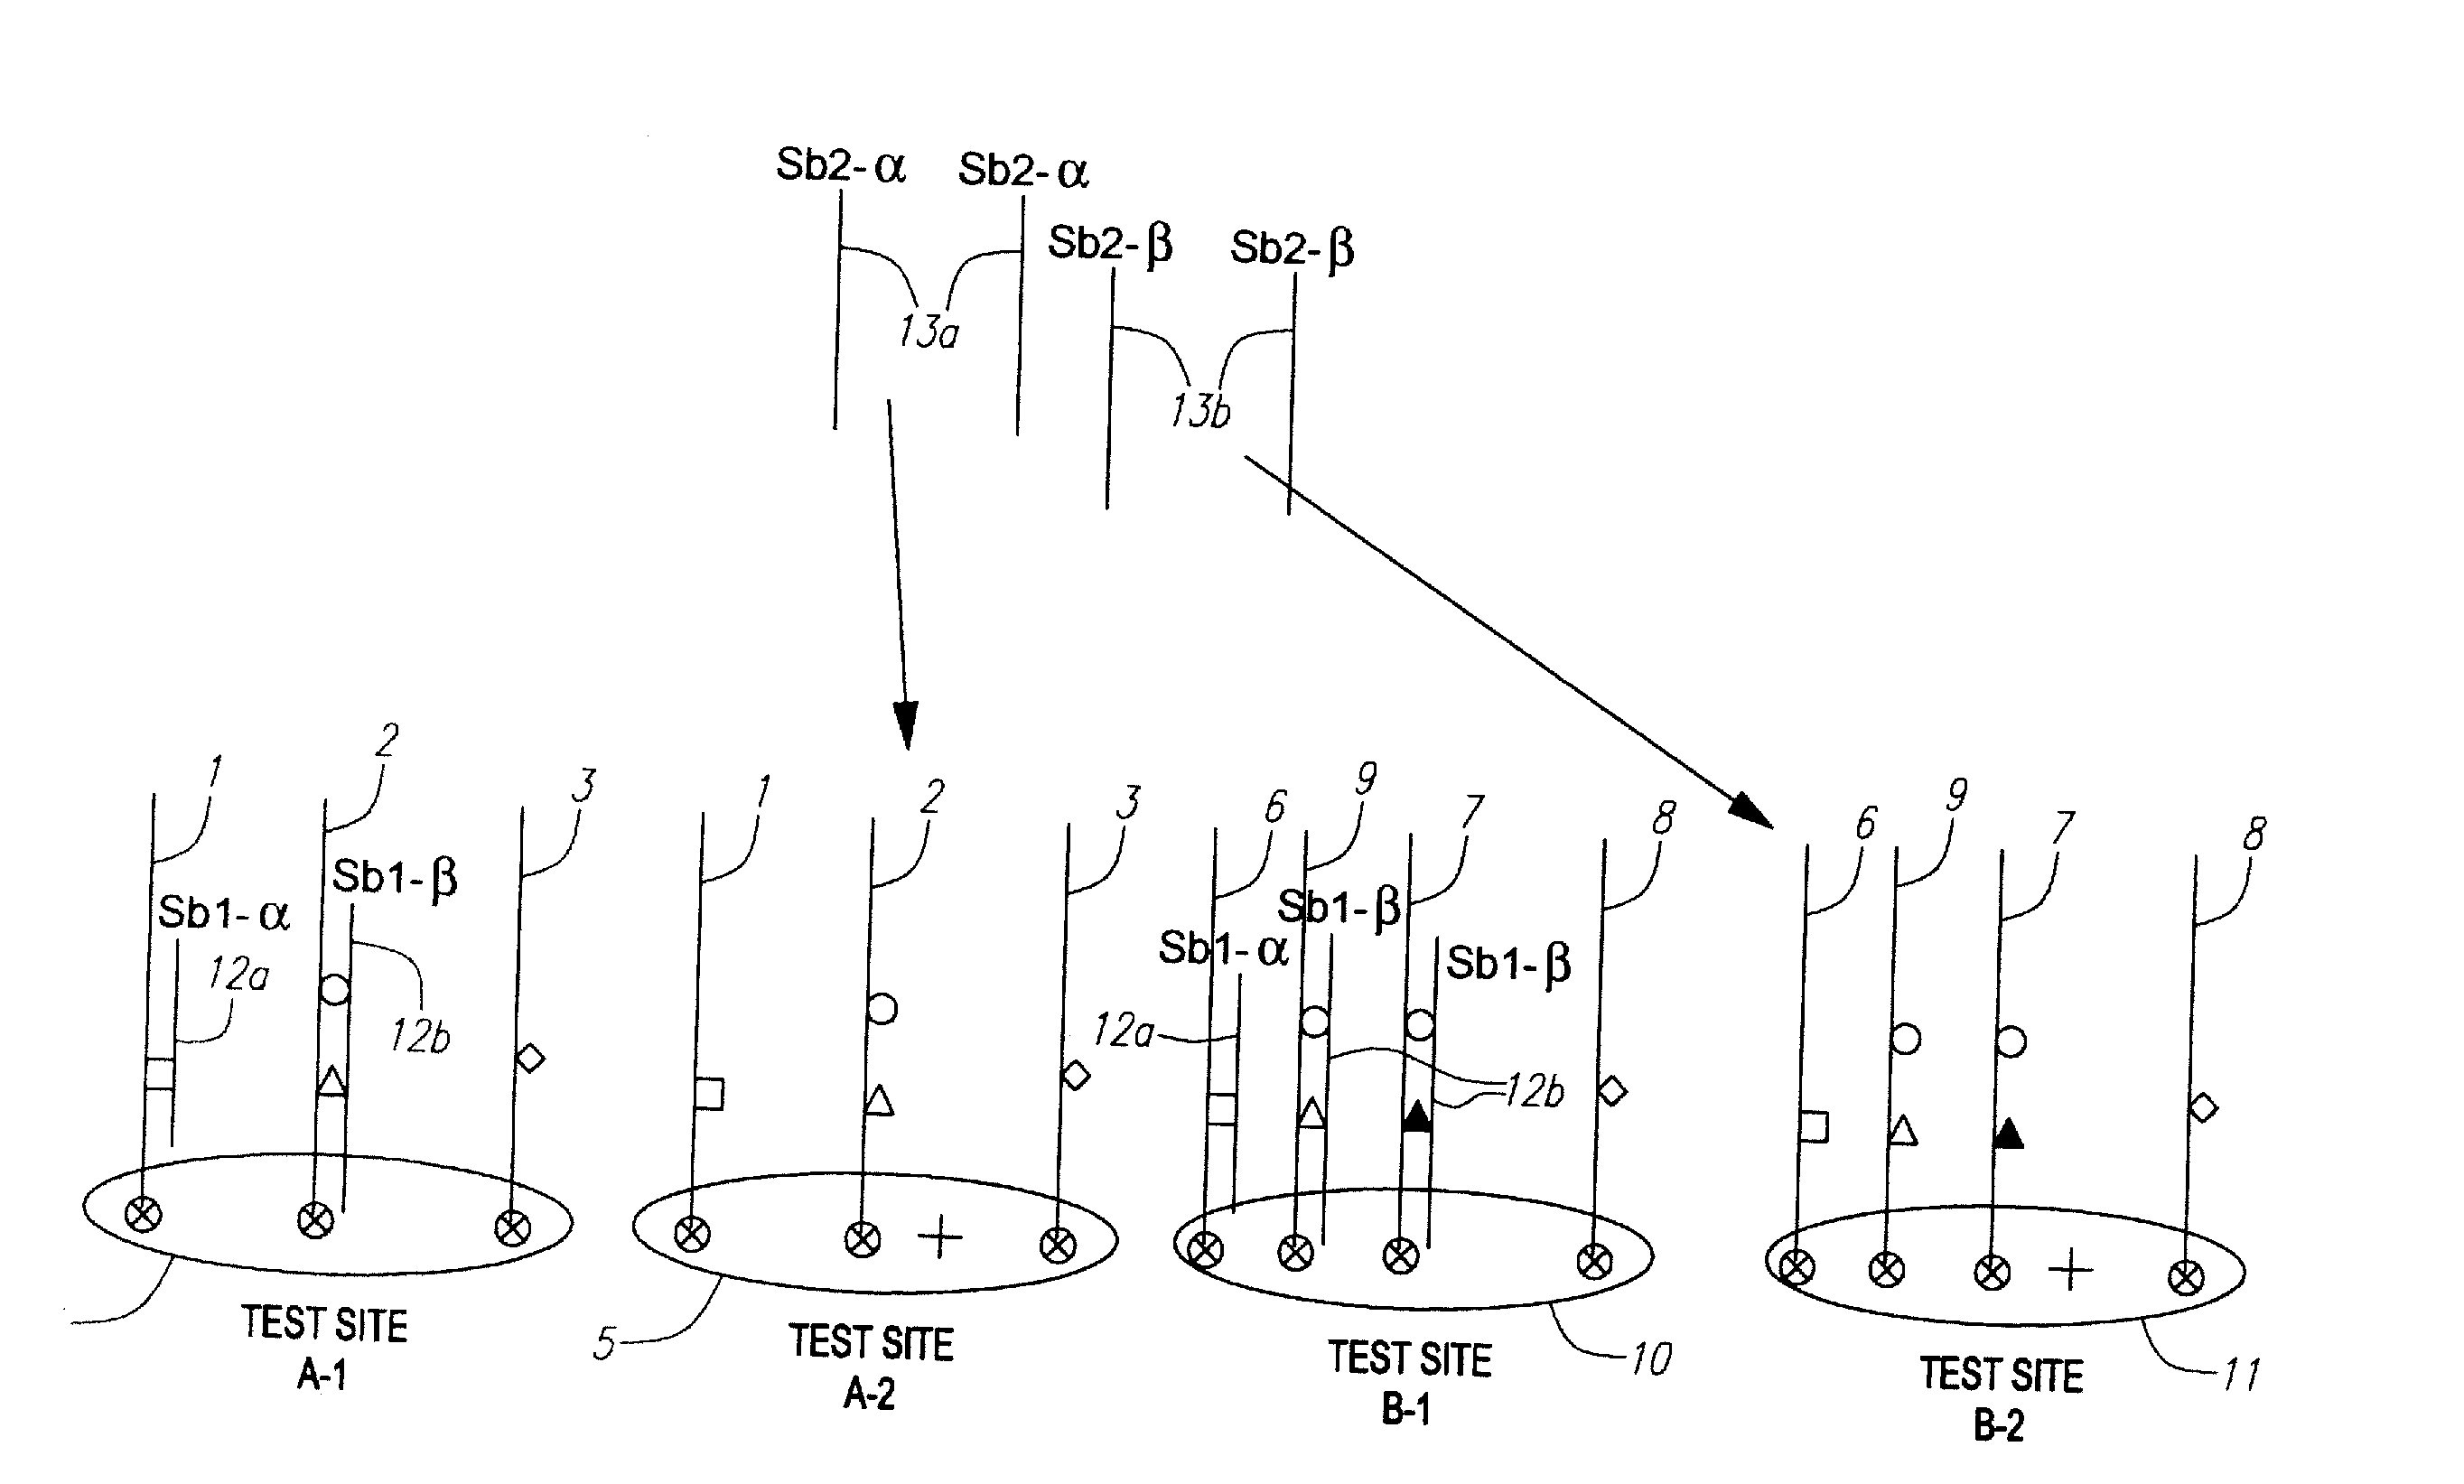 Methods and apparatus for screening and detecting multiple genetic mutations